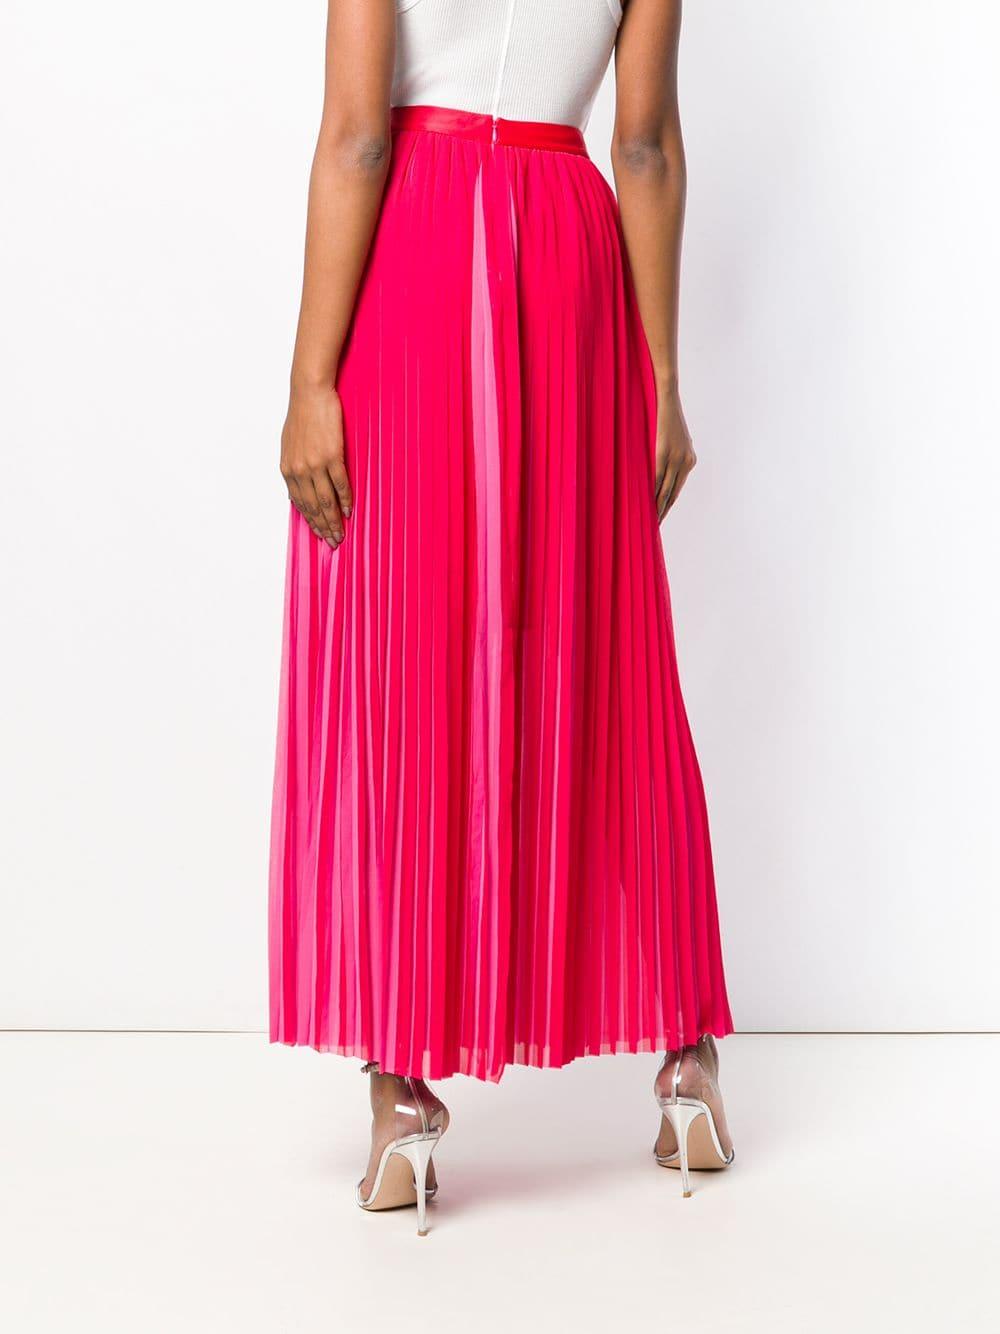 Karl Lagerfeld Synthetic Pleated Maxi Skirt in Pink - Lyst